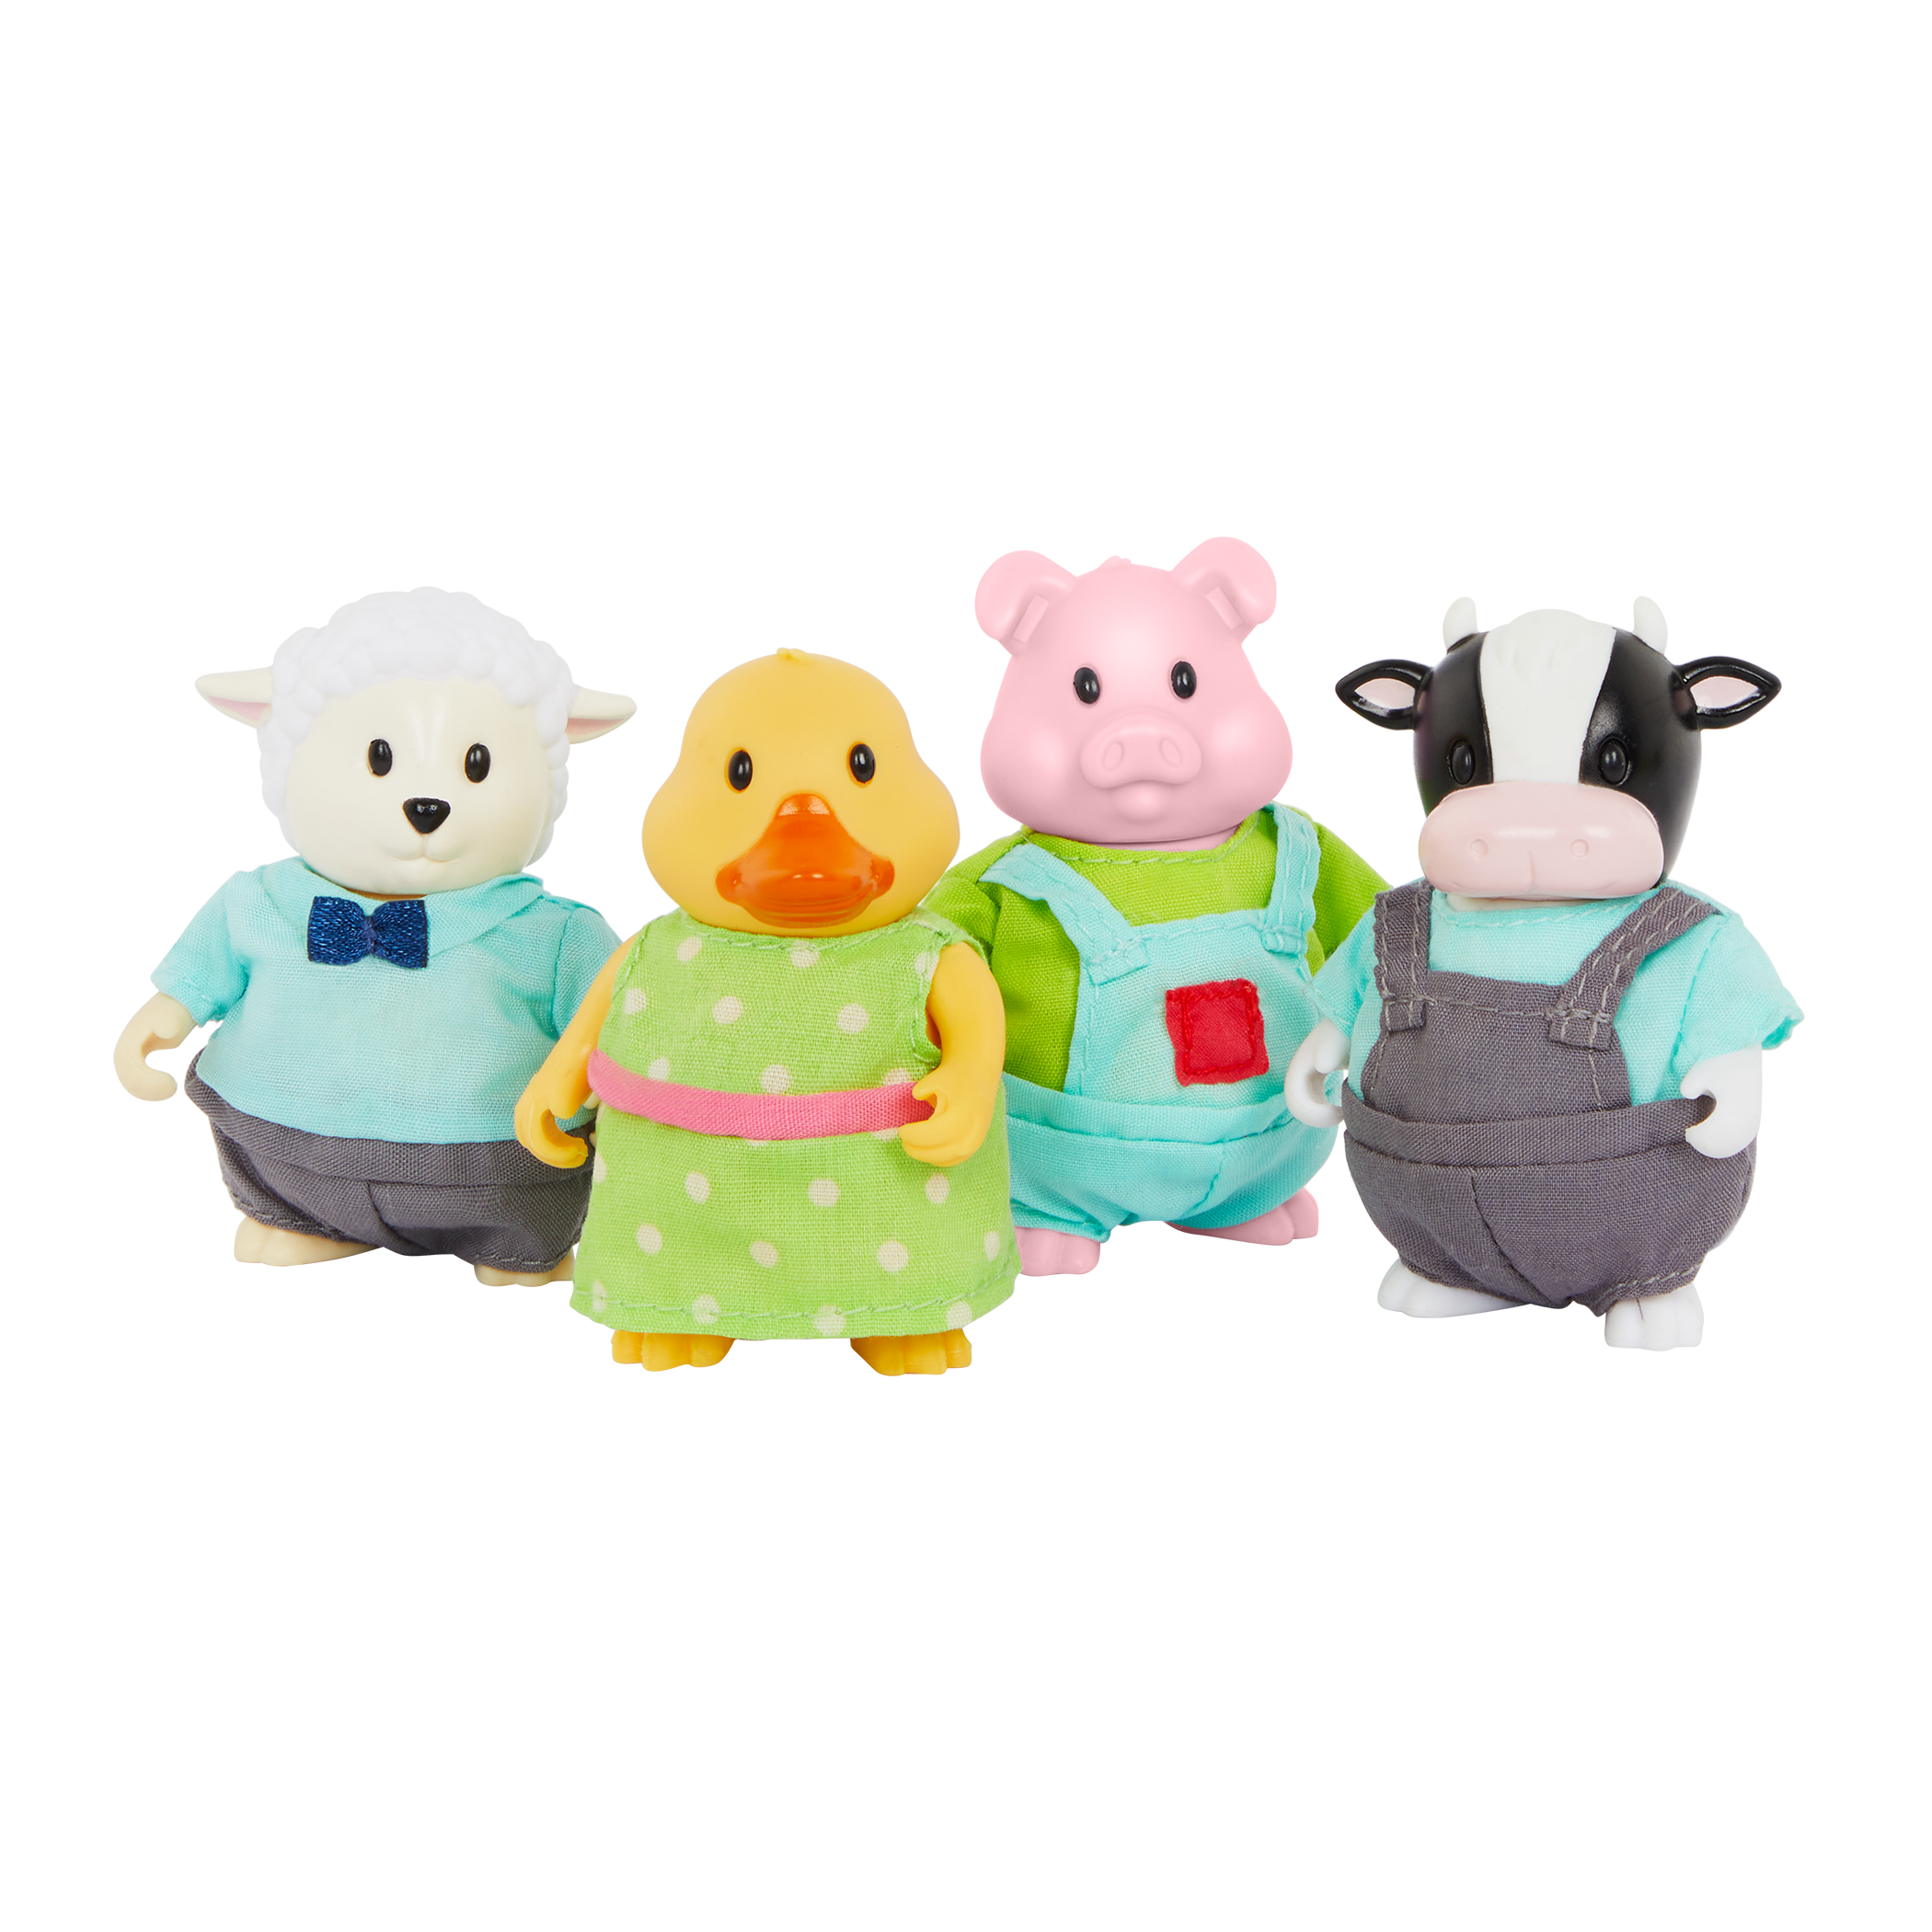 Group of Animal Figurines including a sheep, duck, pig and cow.